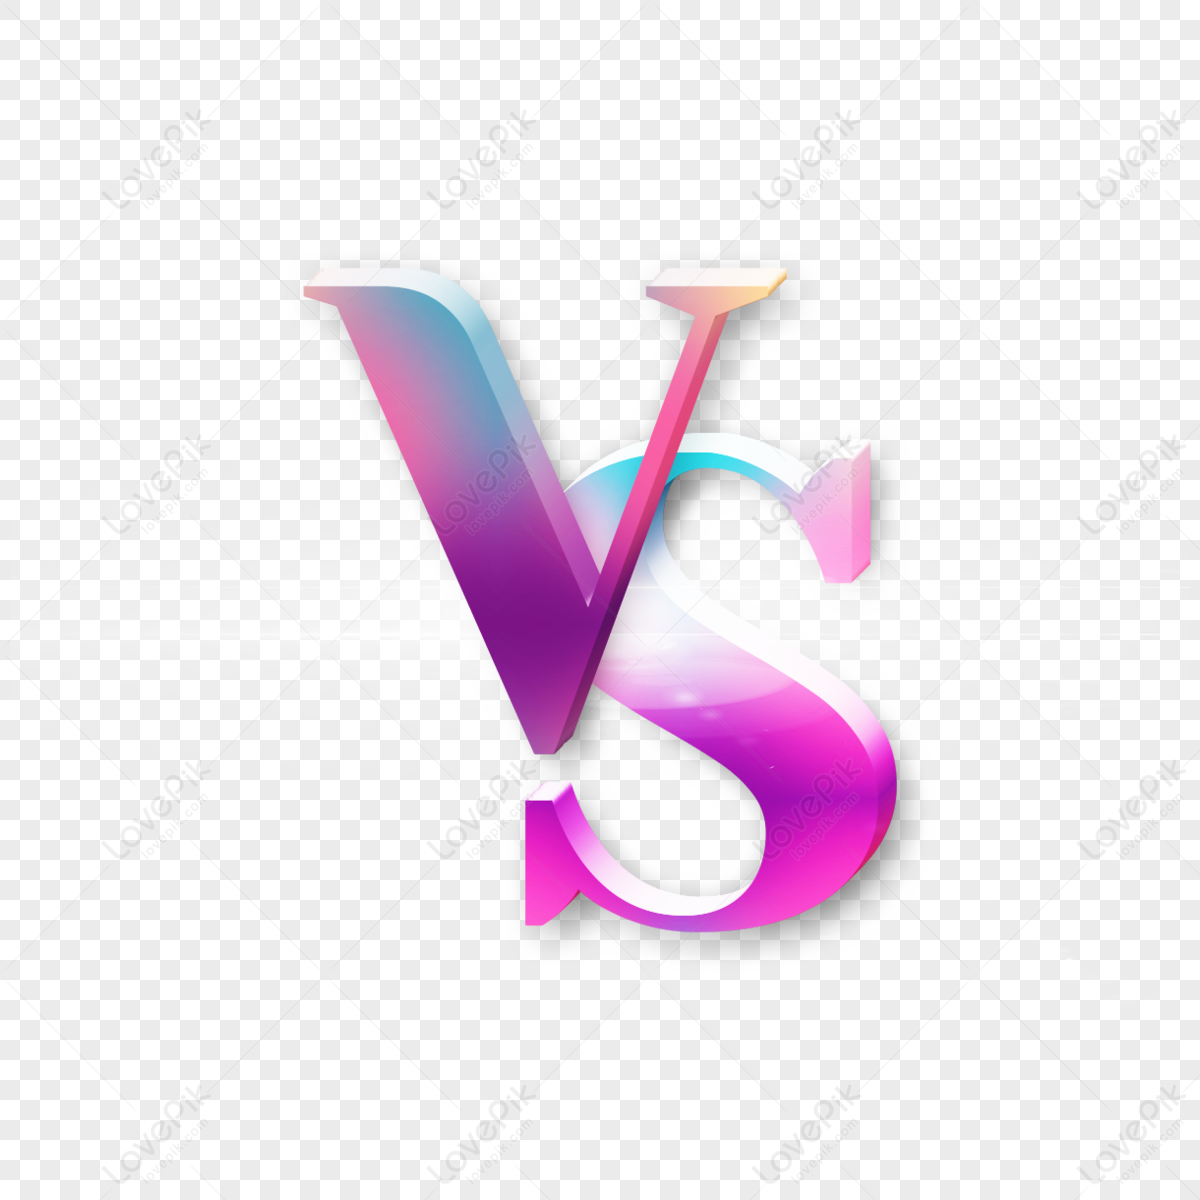 Vs War, Font, No War, Vs Match PNG Picture And Clipart Image For Free  Download - Lovepik | 400752455